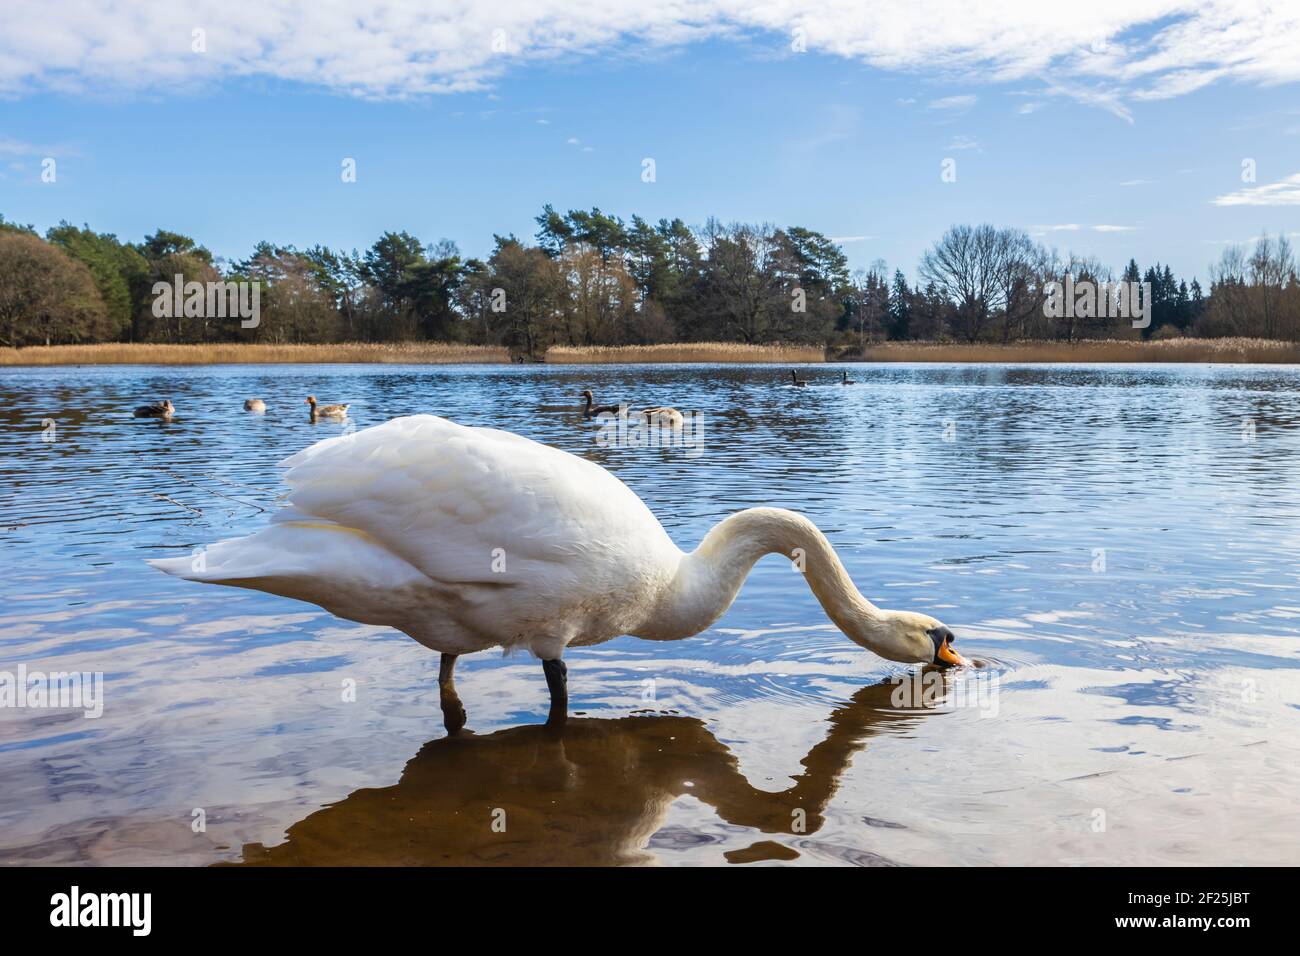 A mute swan (Cygnus olor) stands in water drinking at Frensham Little Pond, near Farnham, Surrey, a local rural beauty spot and recreational area Stock Photo